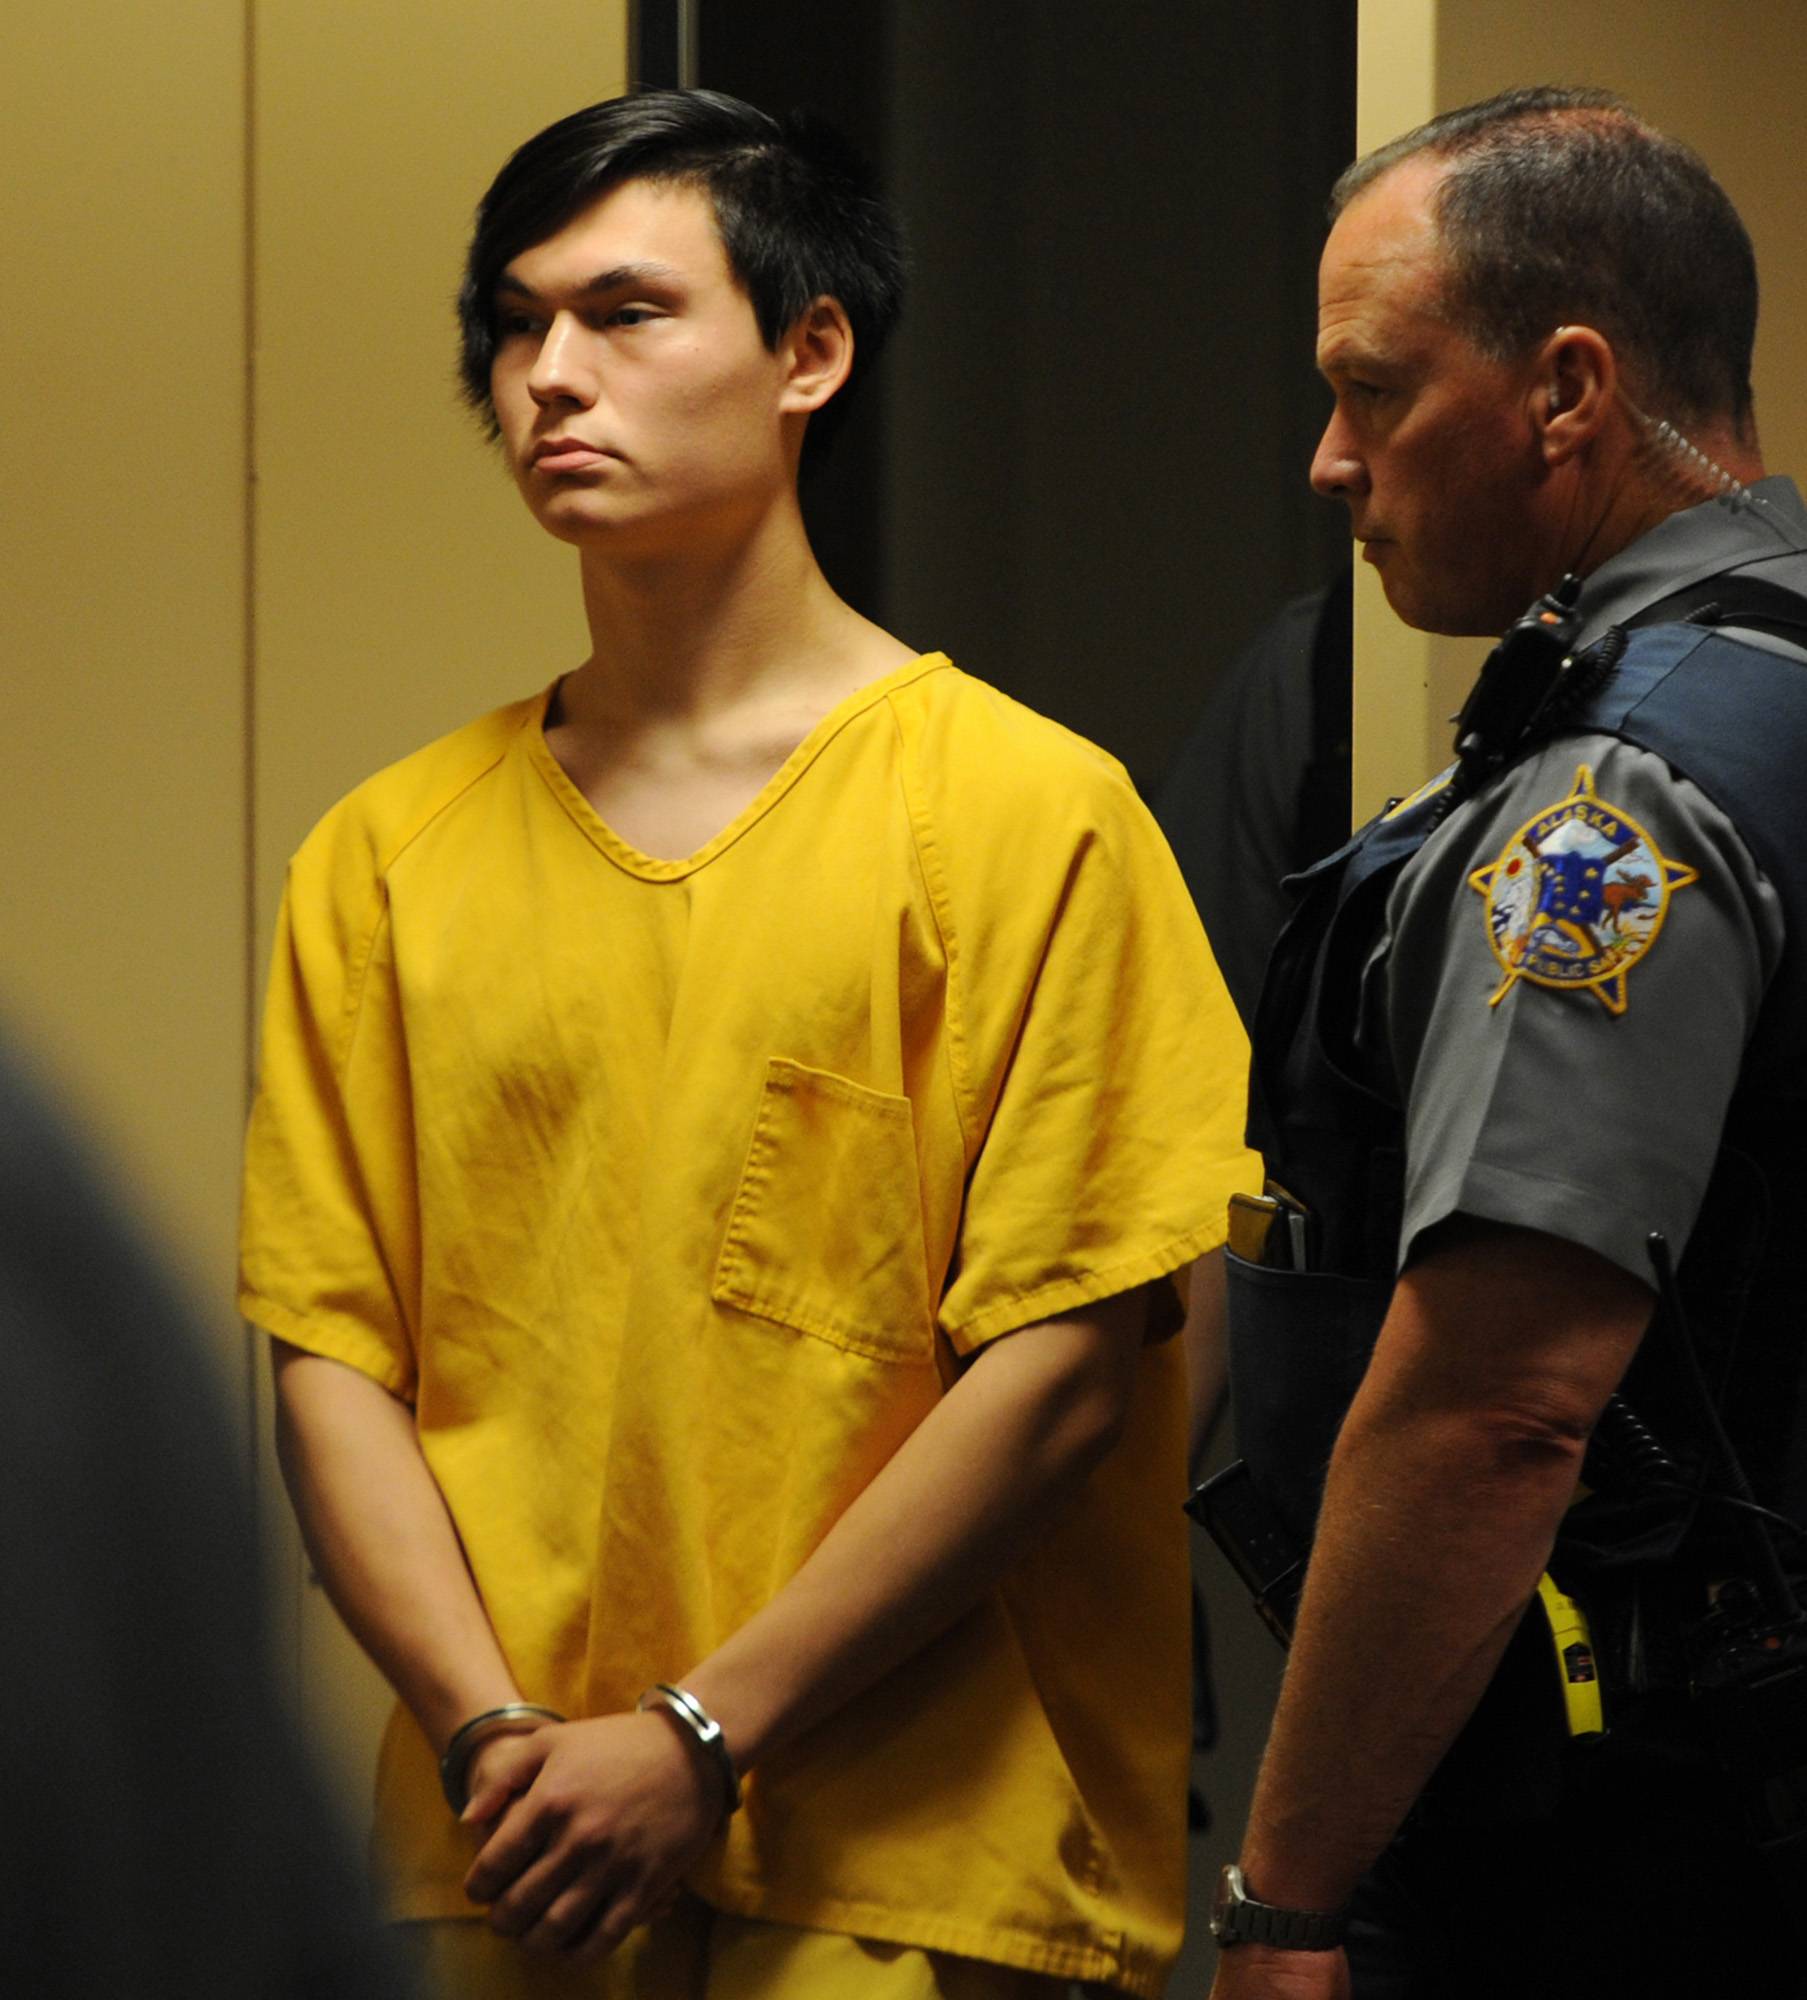 PHOTO: Caleb Leyland, 19, appears in a Superior courtroom for his arraignment in the Nesbett Courthouse in Anchorage, Alaska, on June 18, 2019.